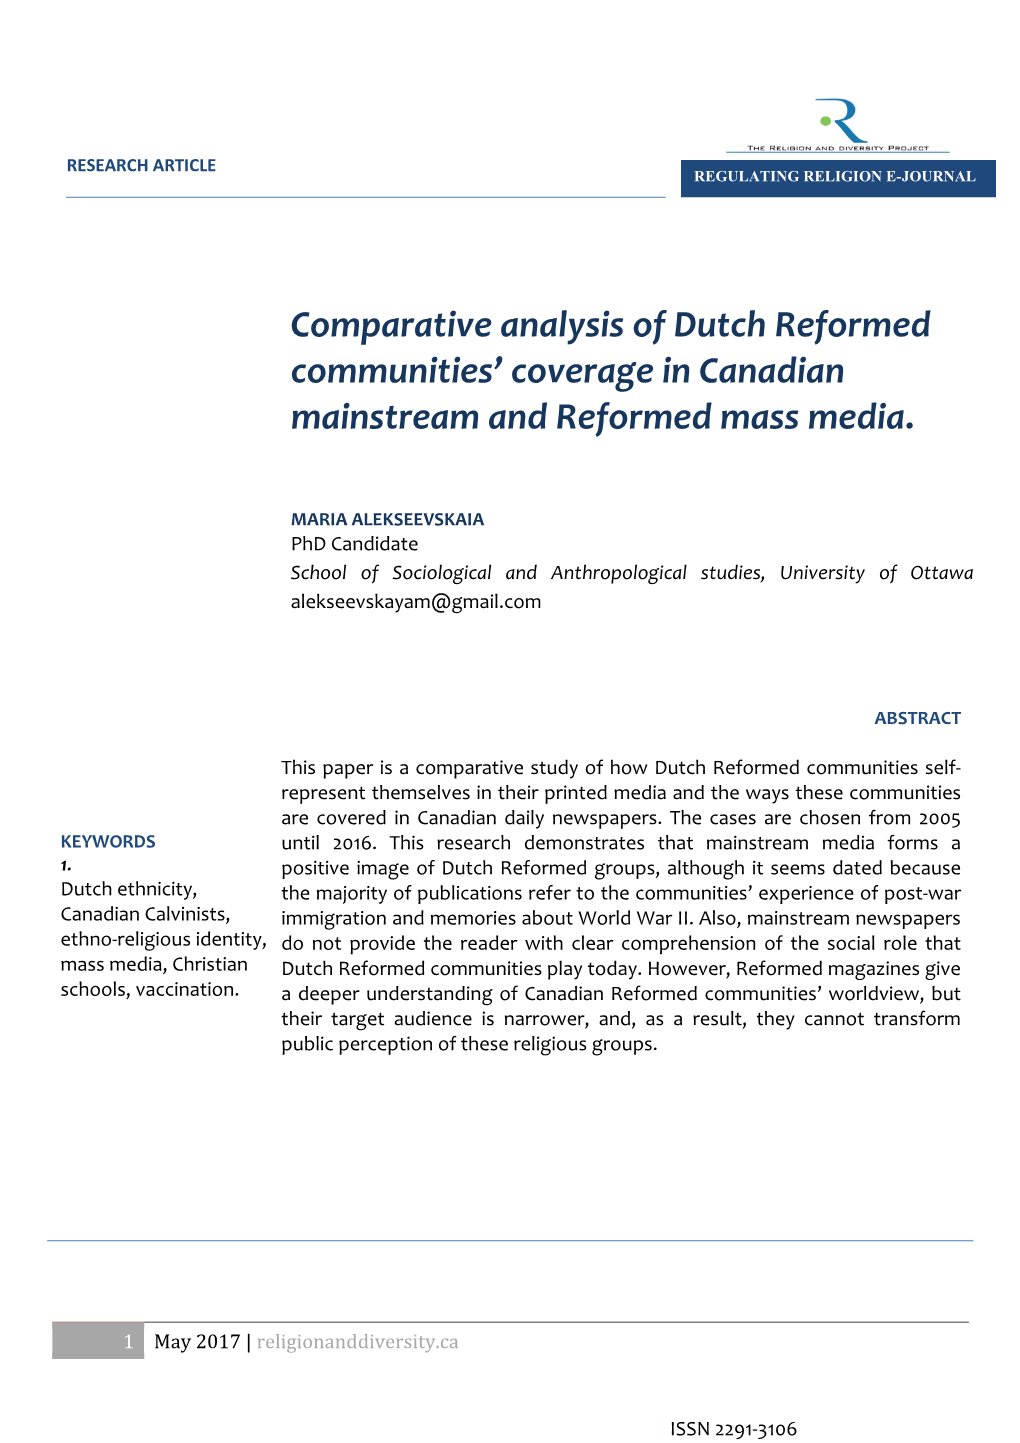 Comparative Analysis of Dutch Reformed Communities' Coverage In